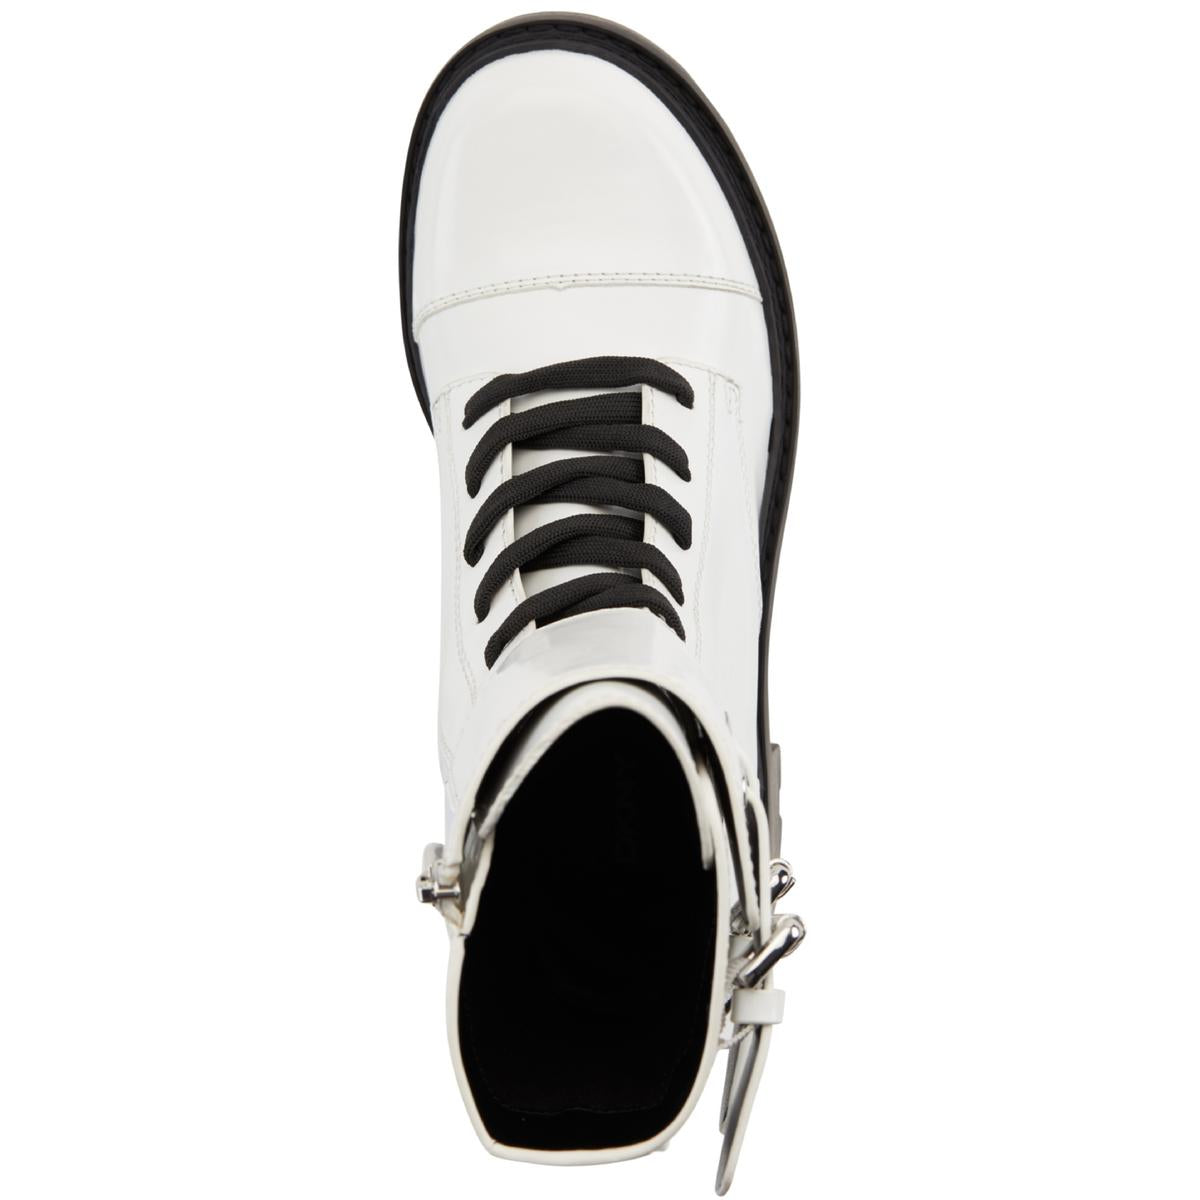 DKNY Womens Bart Lace-Up Buckled B White